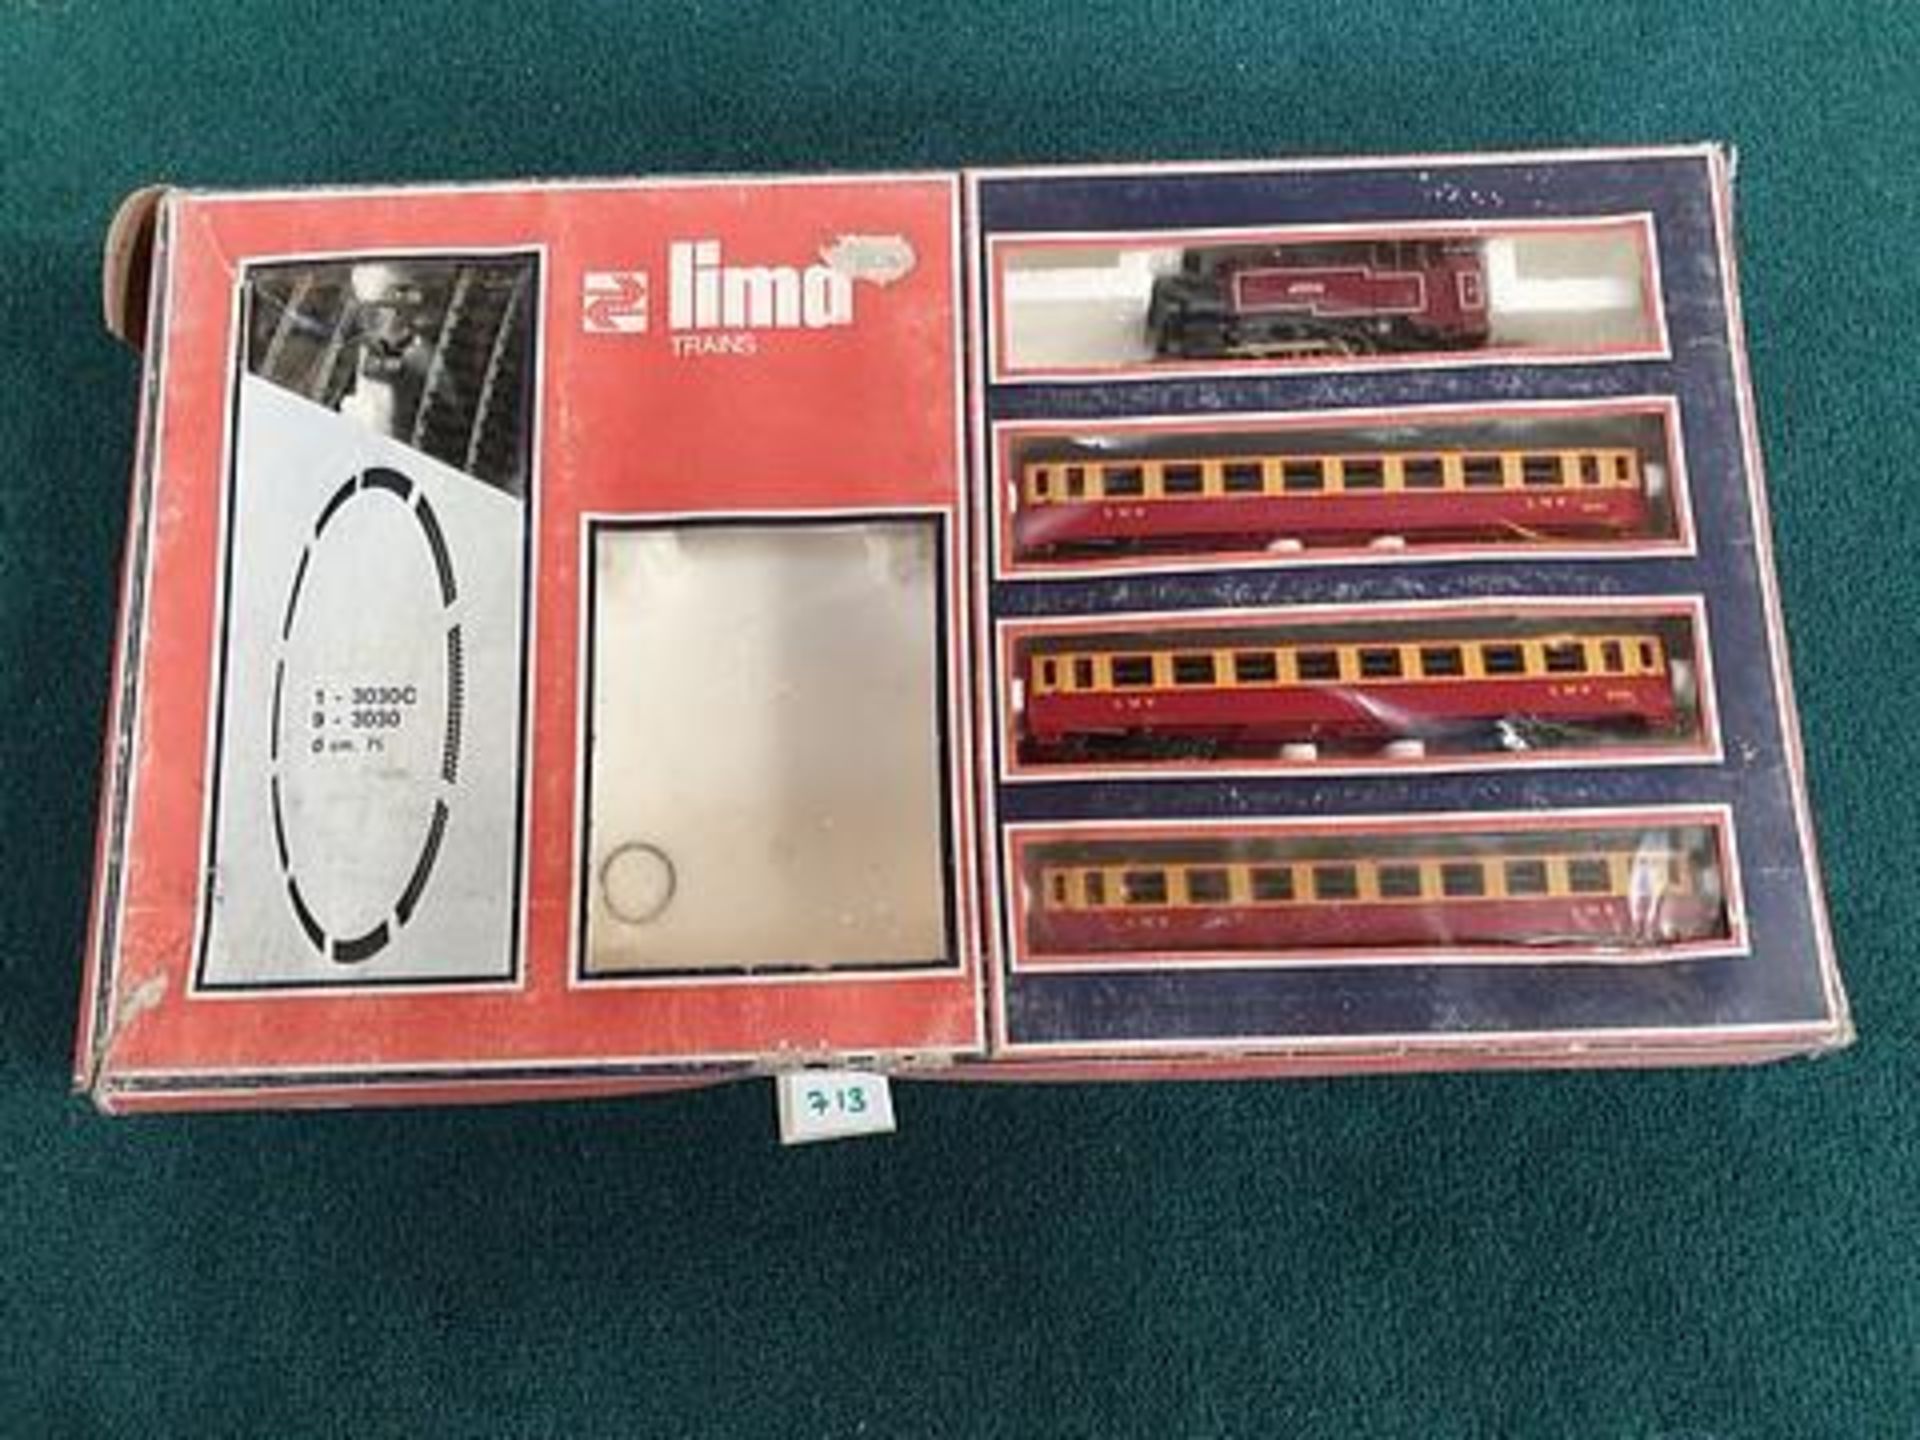 Lima Trains 4506A F set complete with engine, 3 x carriages & track (missing transformer) boxed